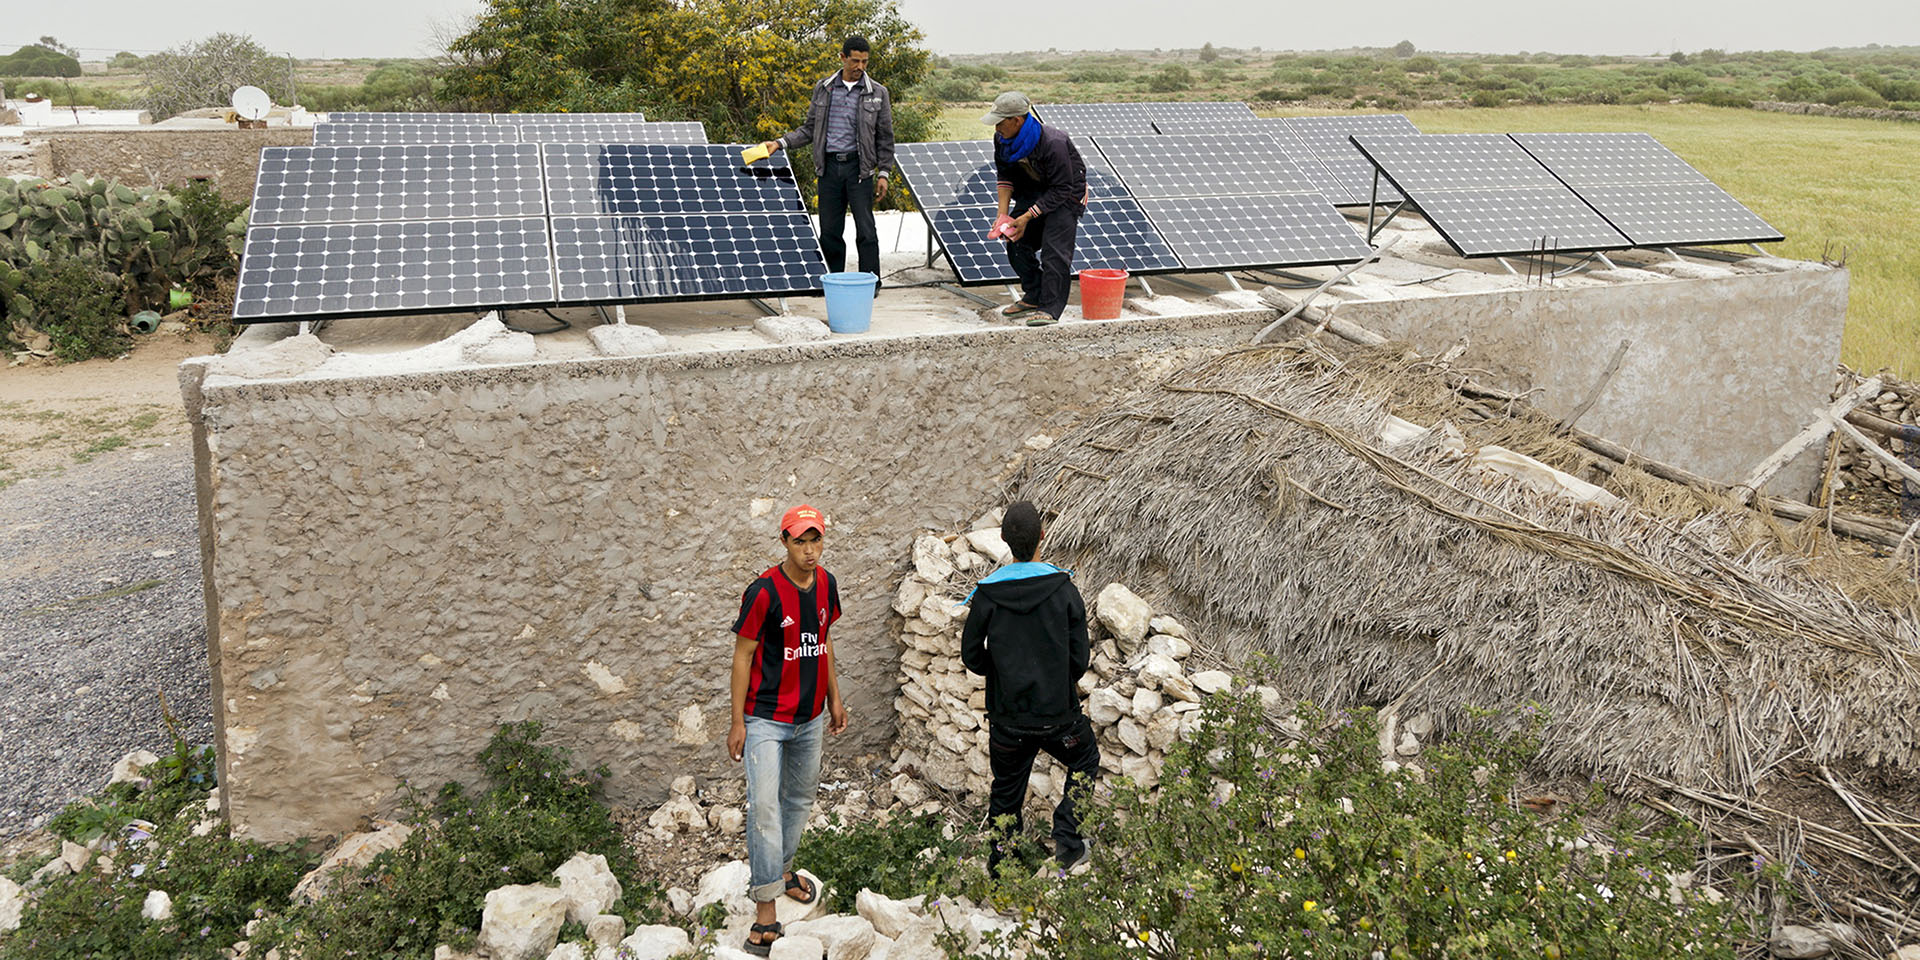 Two men stand on a stone building and wash solar panels. Next to the house are two other men.